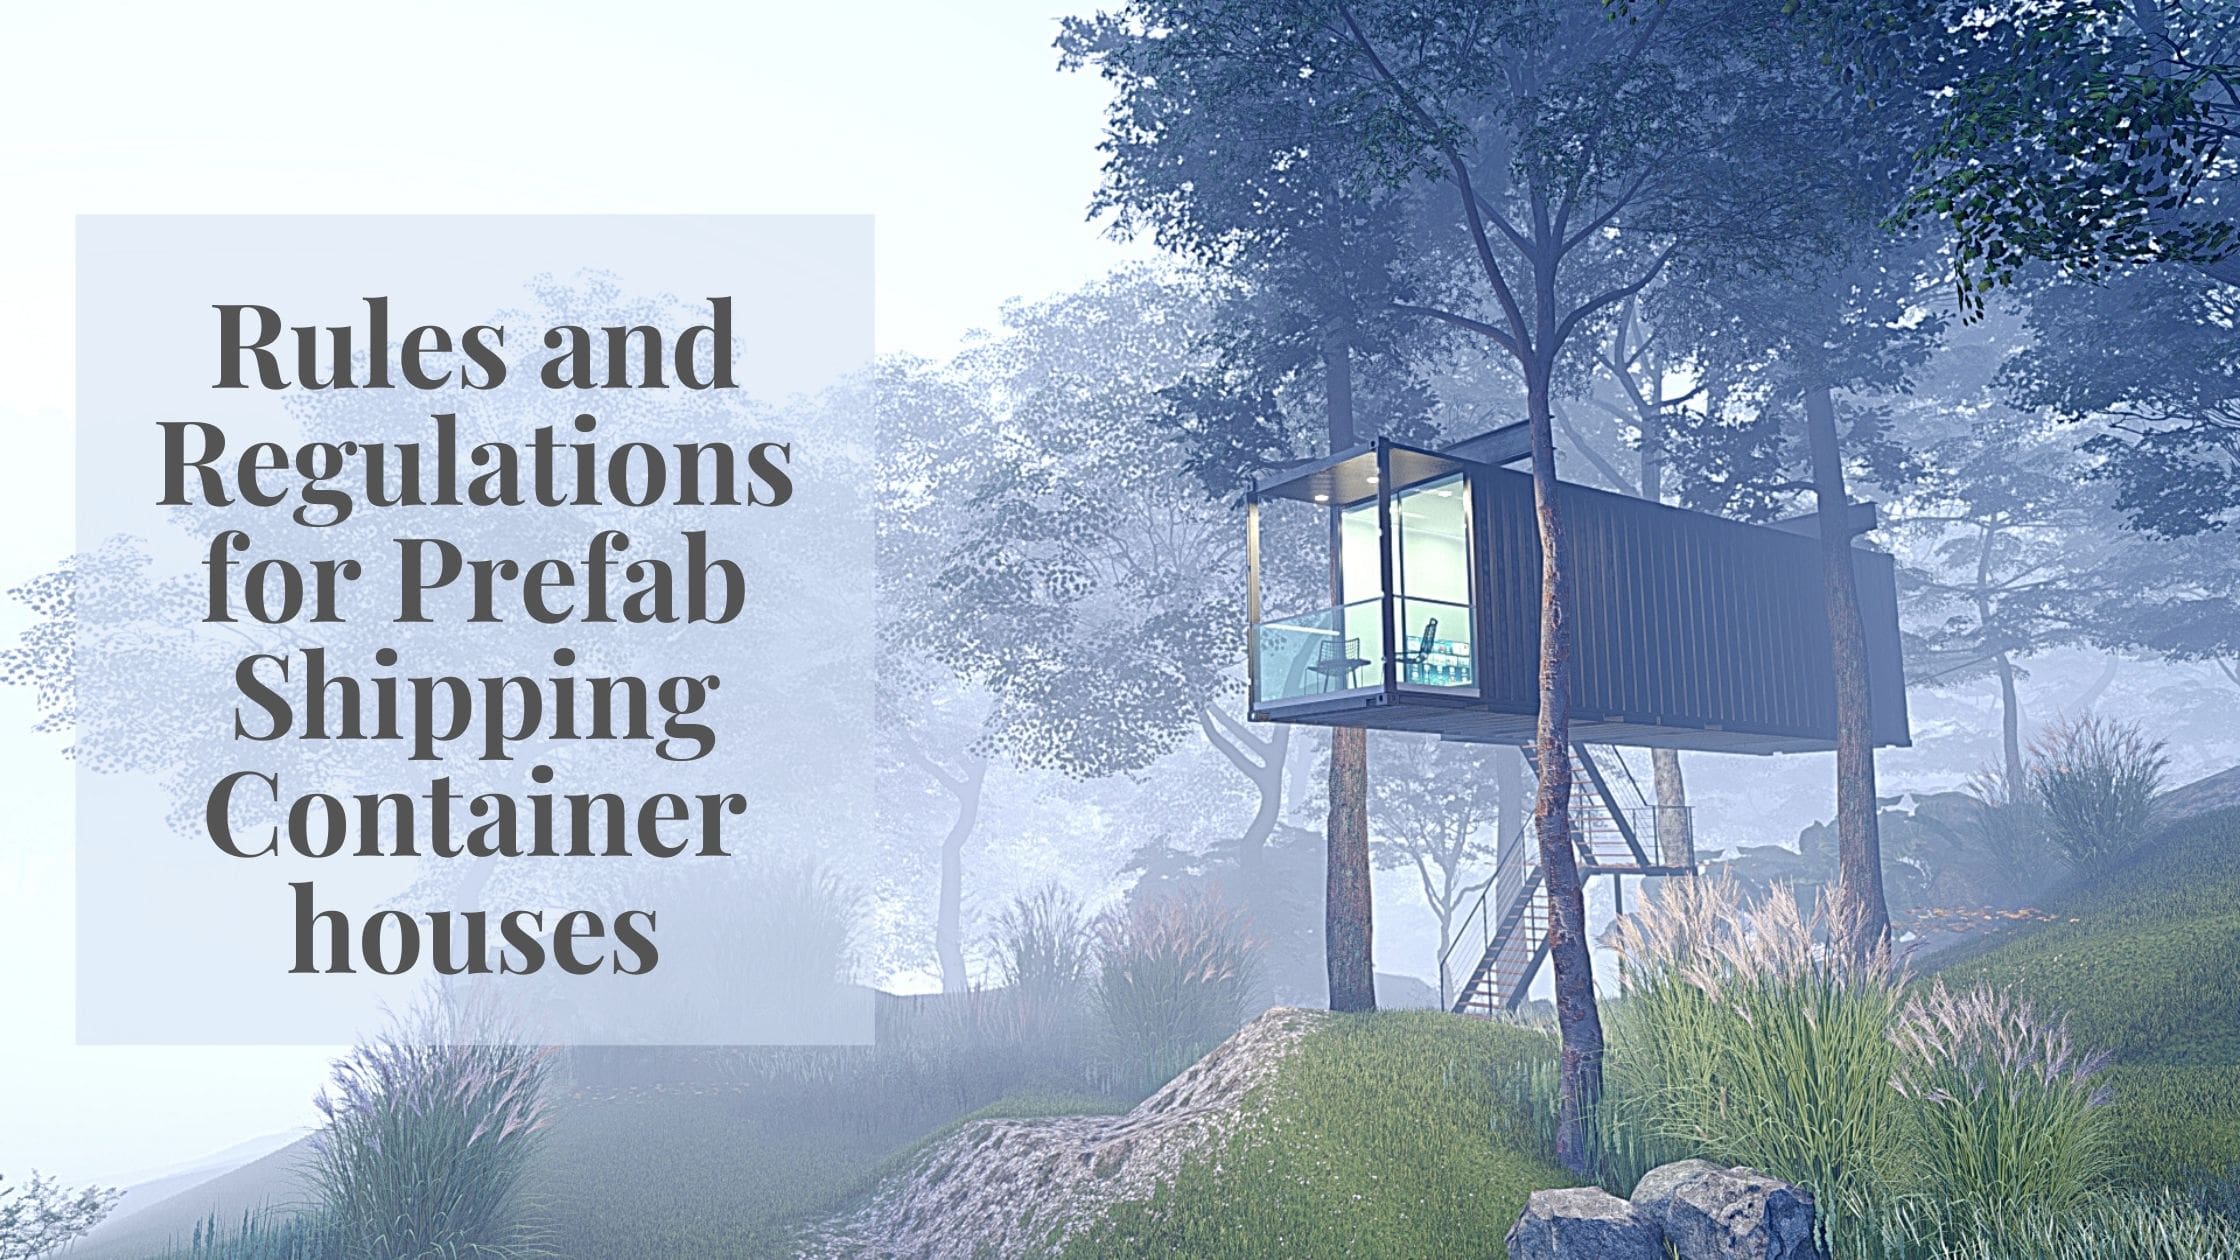 Prefab Shipping Container houses